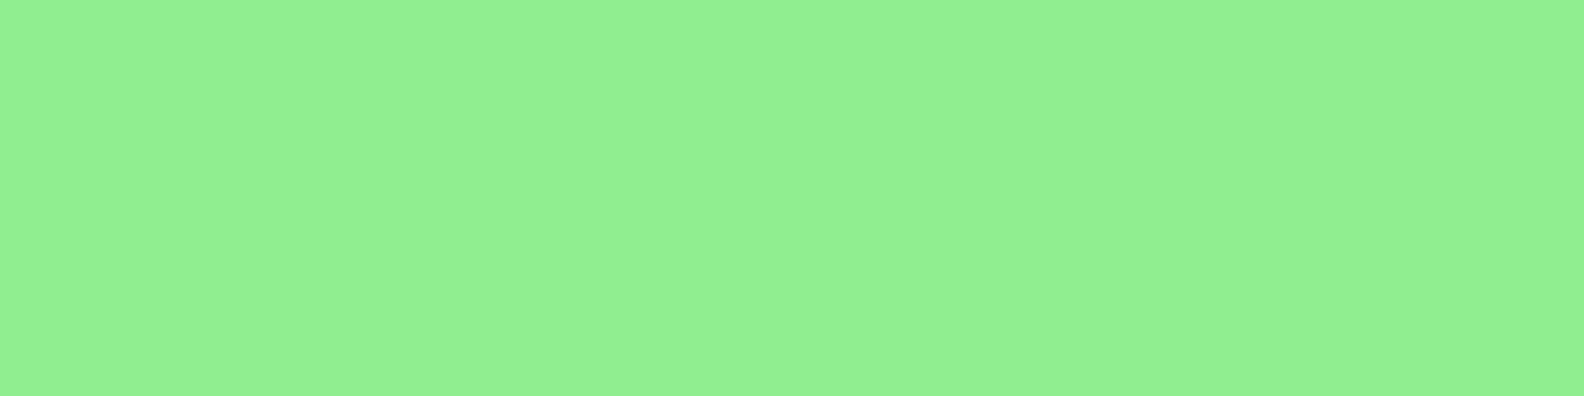 1584x396 Light Green Solid Color Background